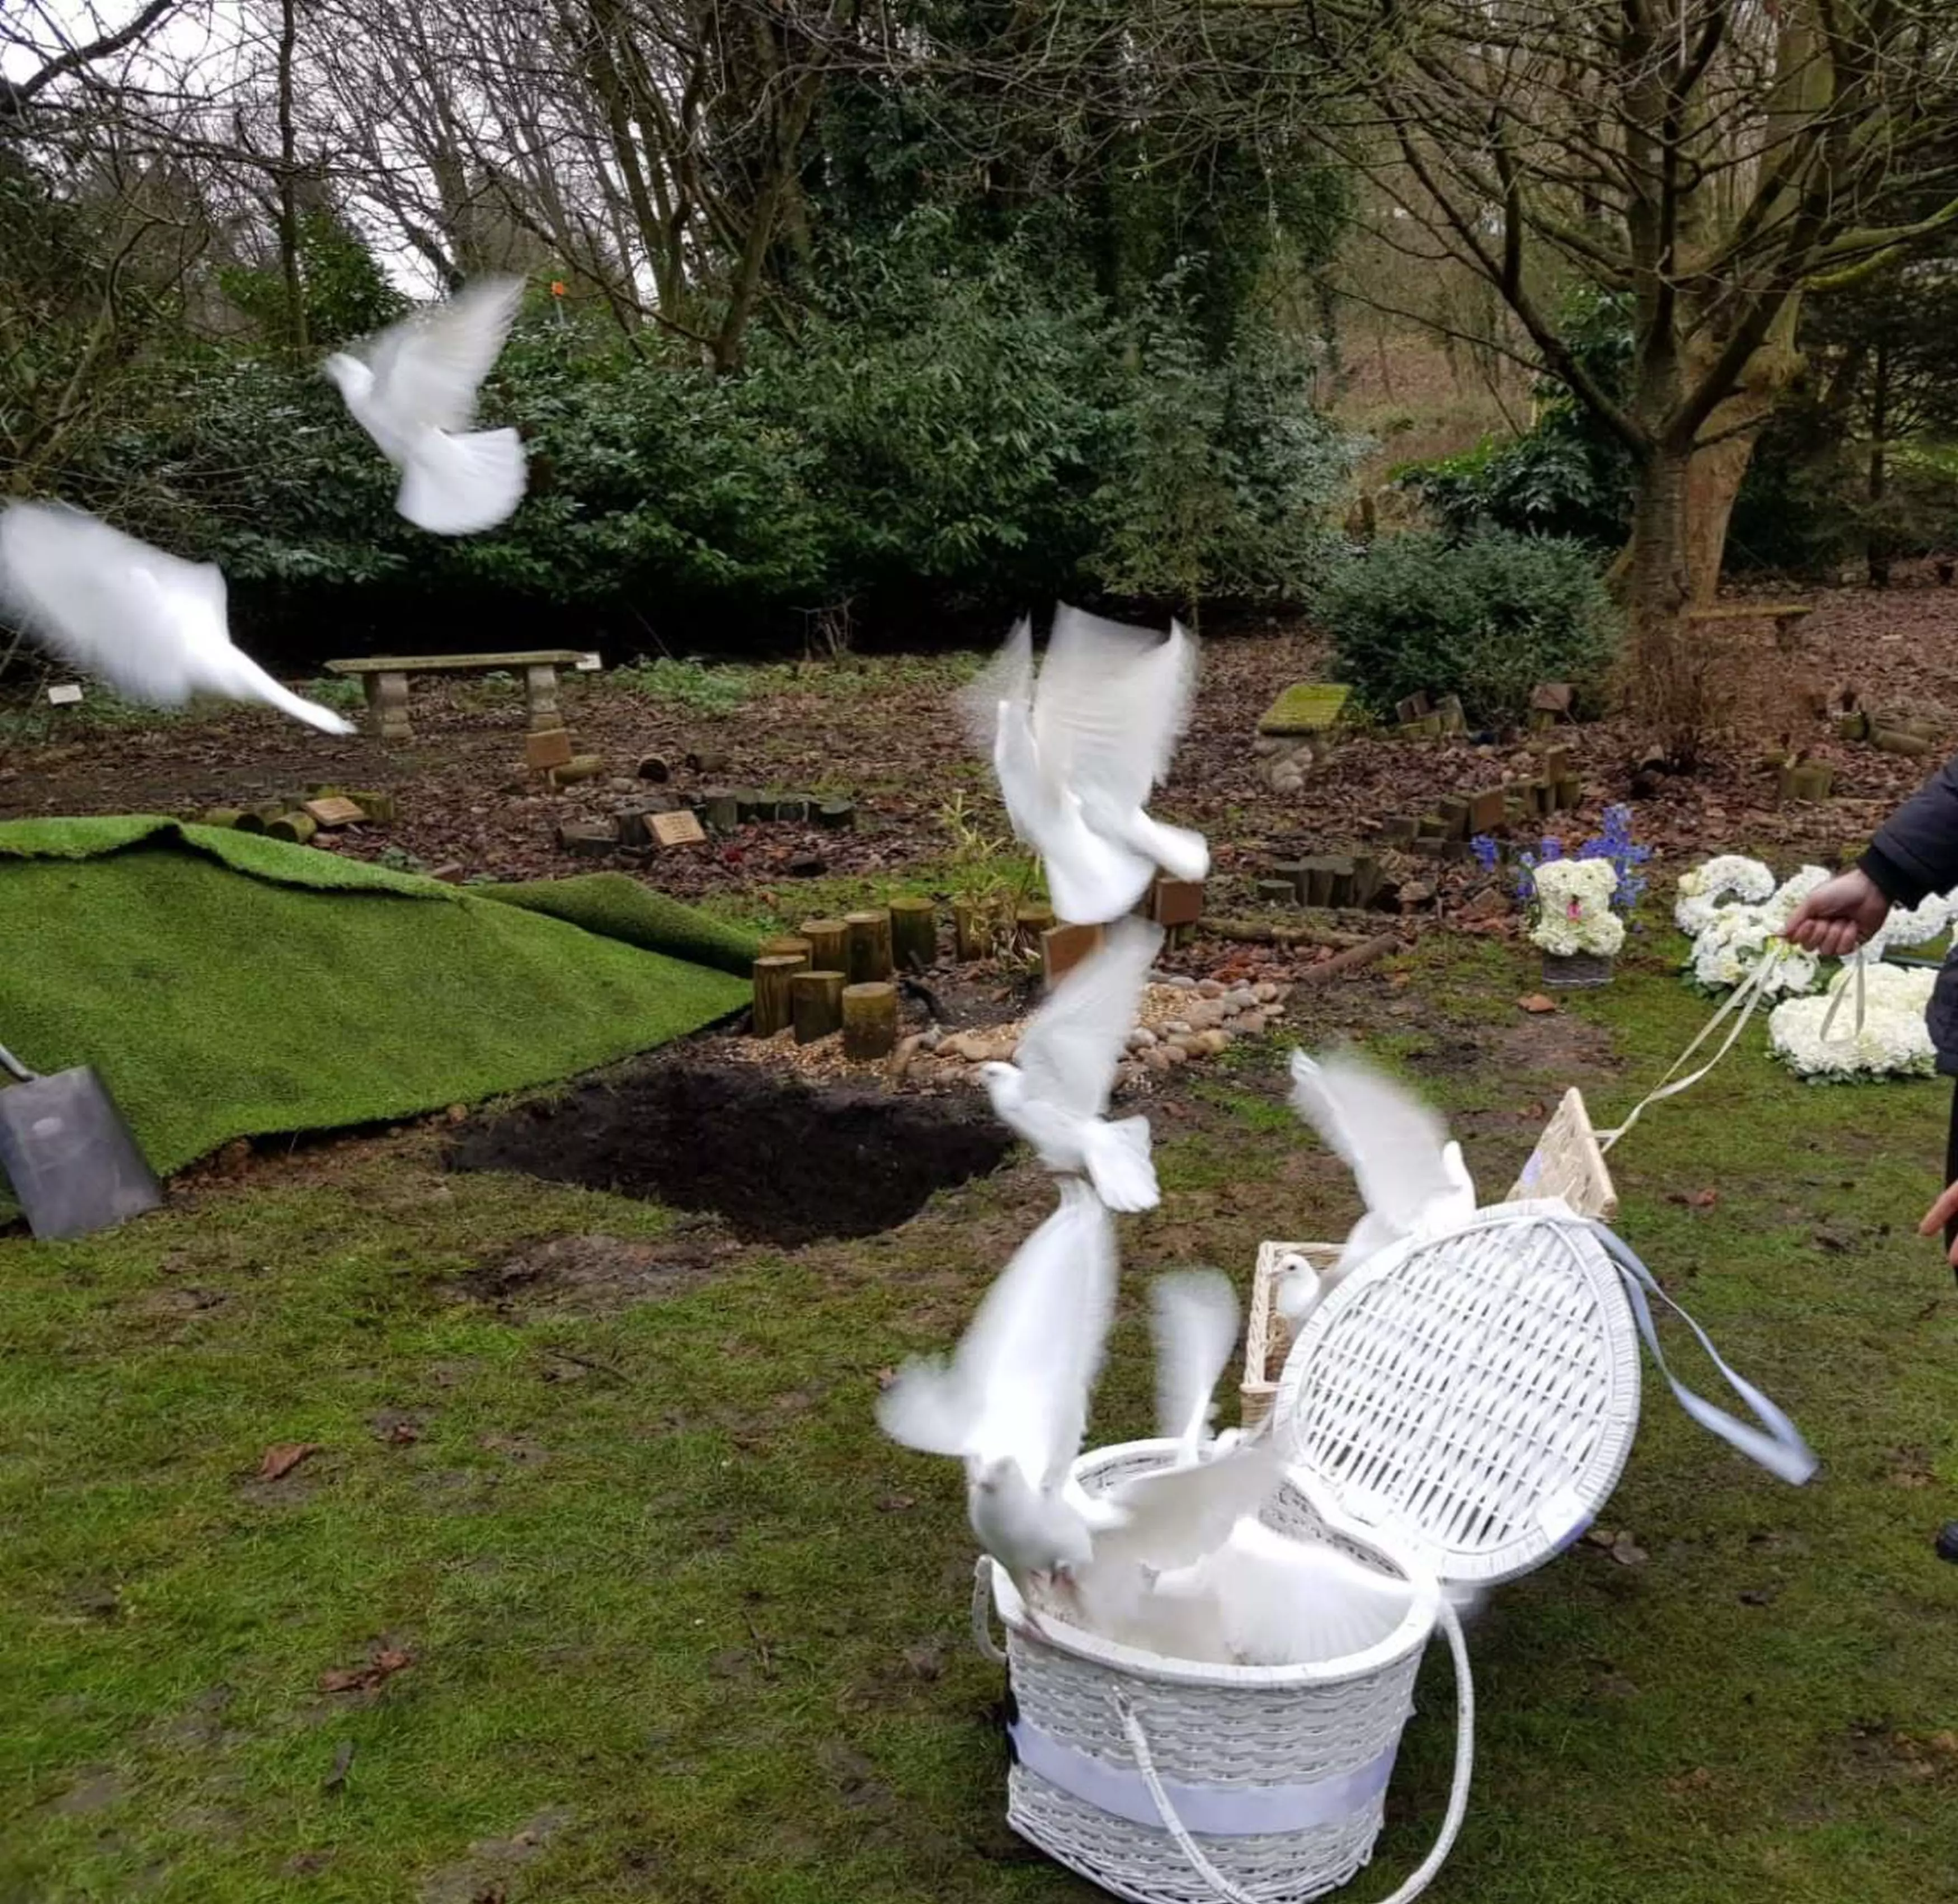 Some of the doves released at Captain's graveside.